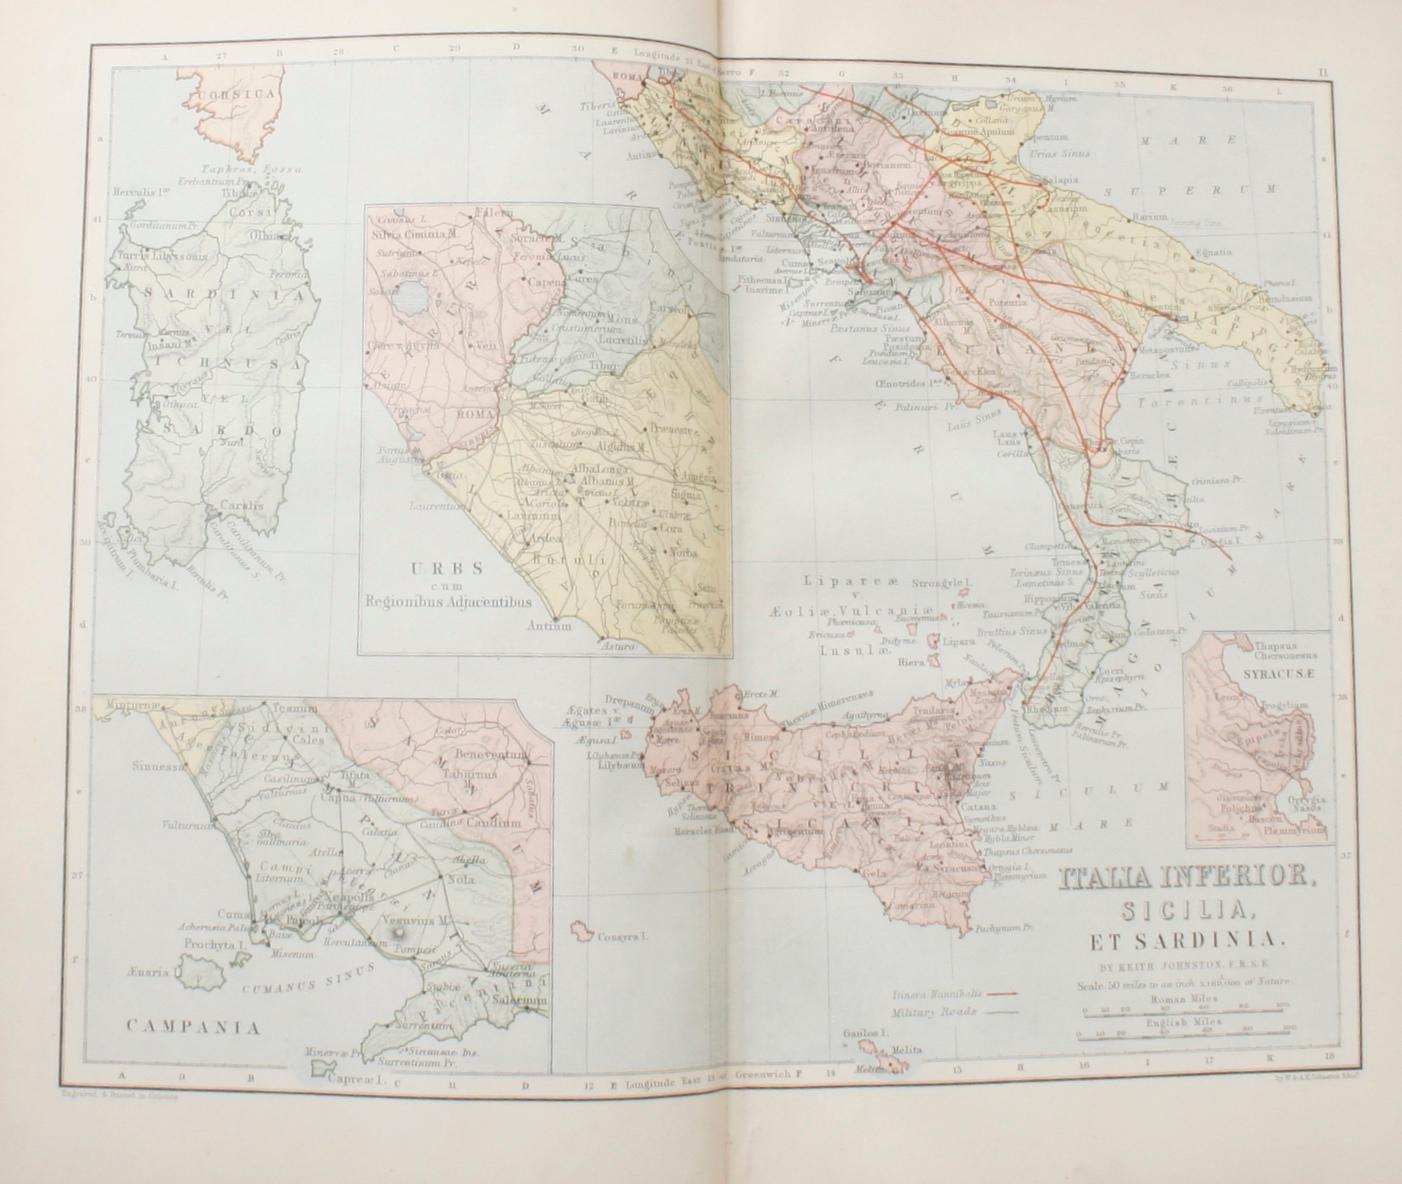 Paper Ginn & Company's Classical Atlas by Ginn & Company, First Edition